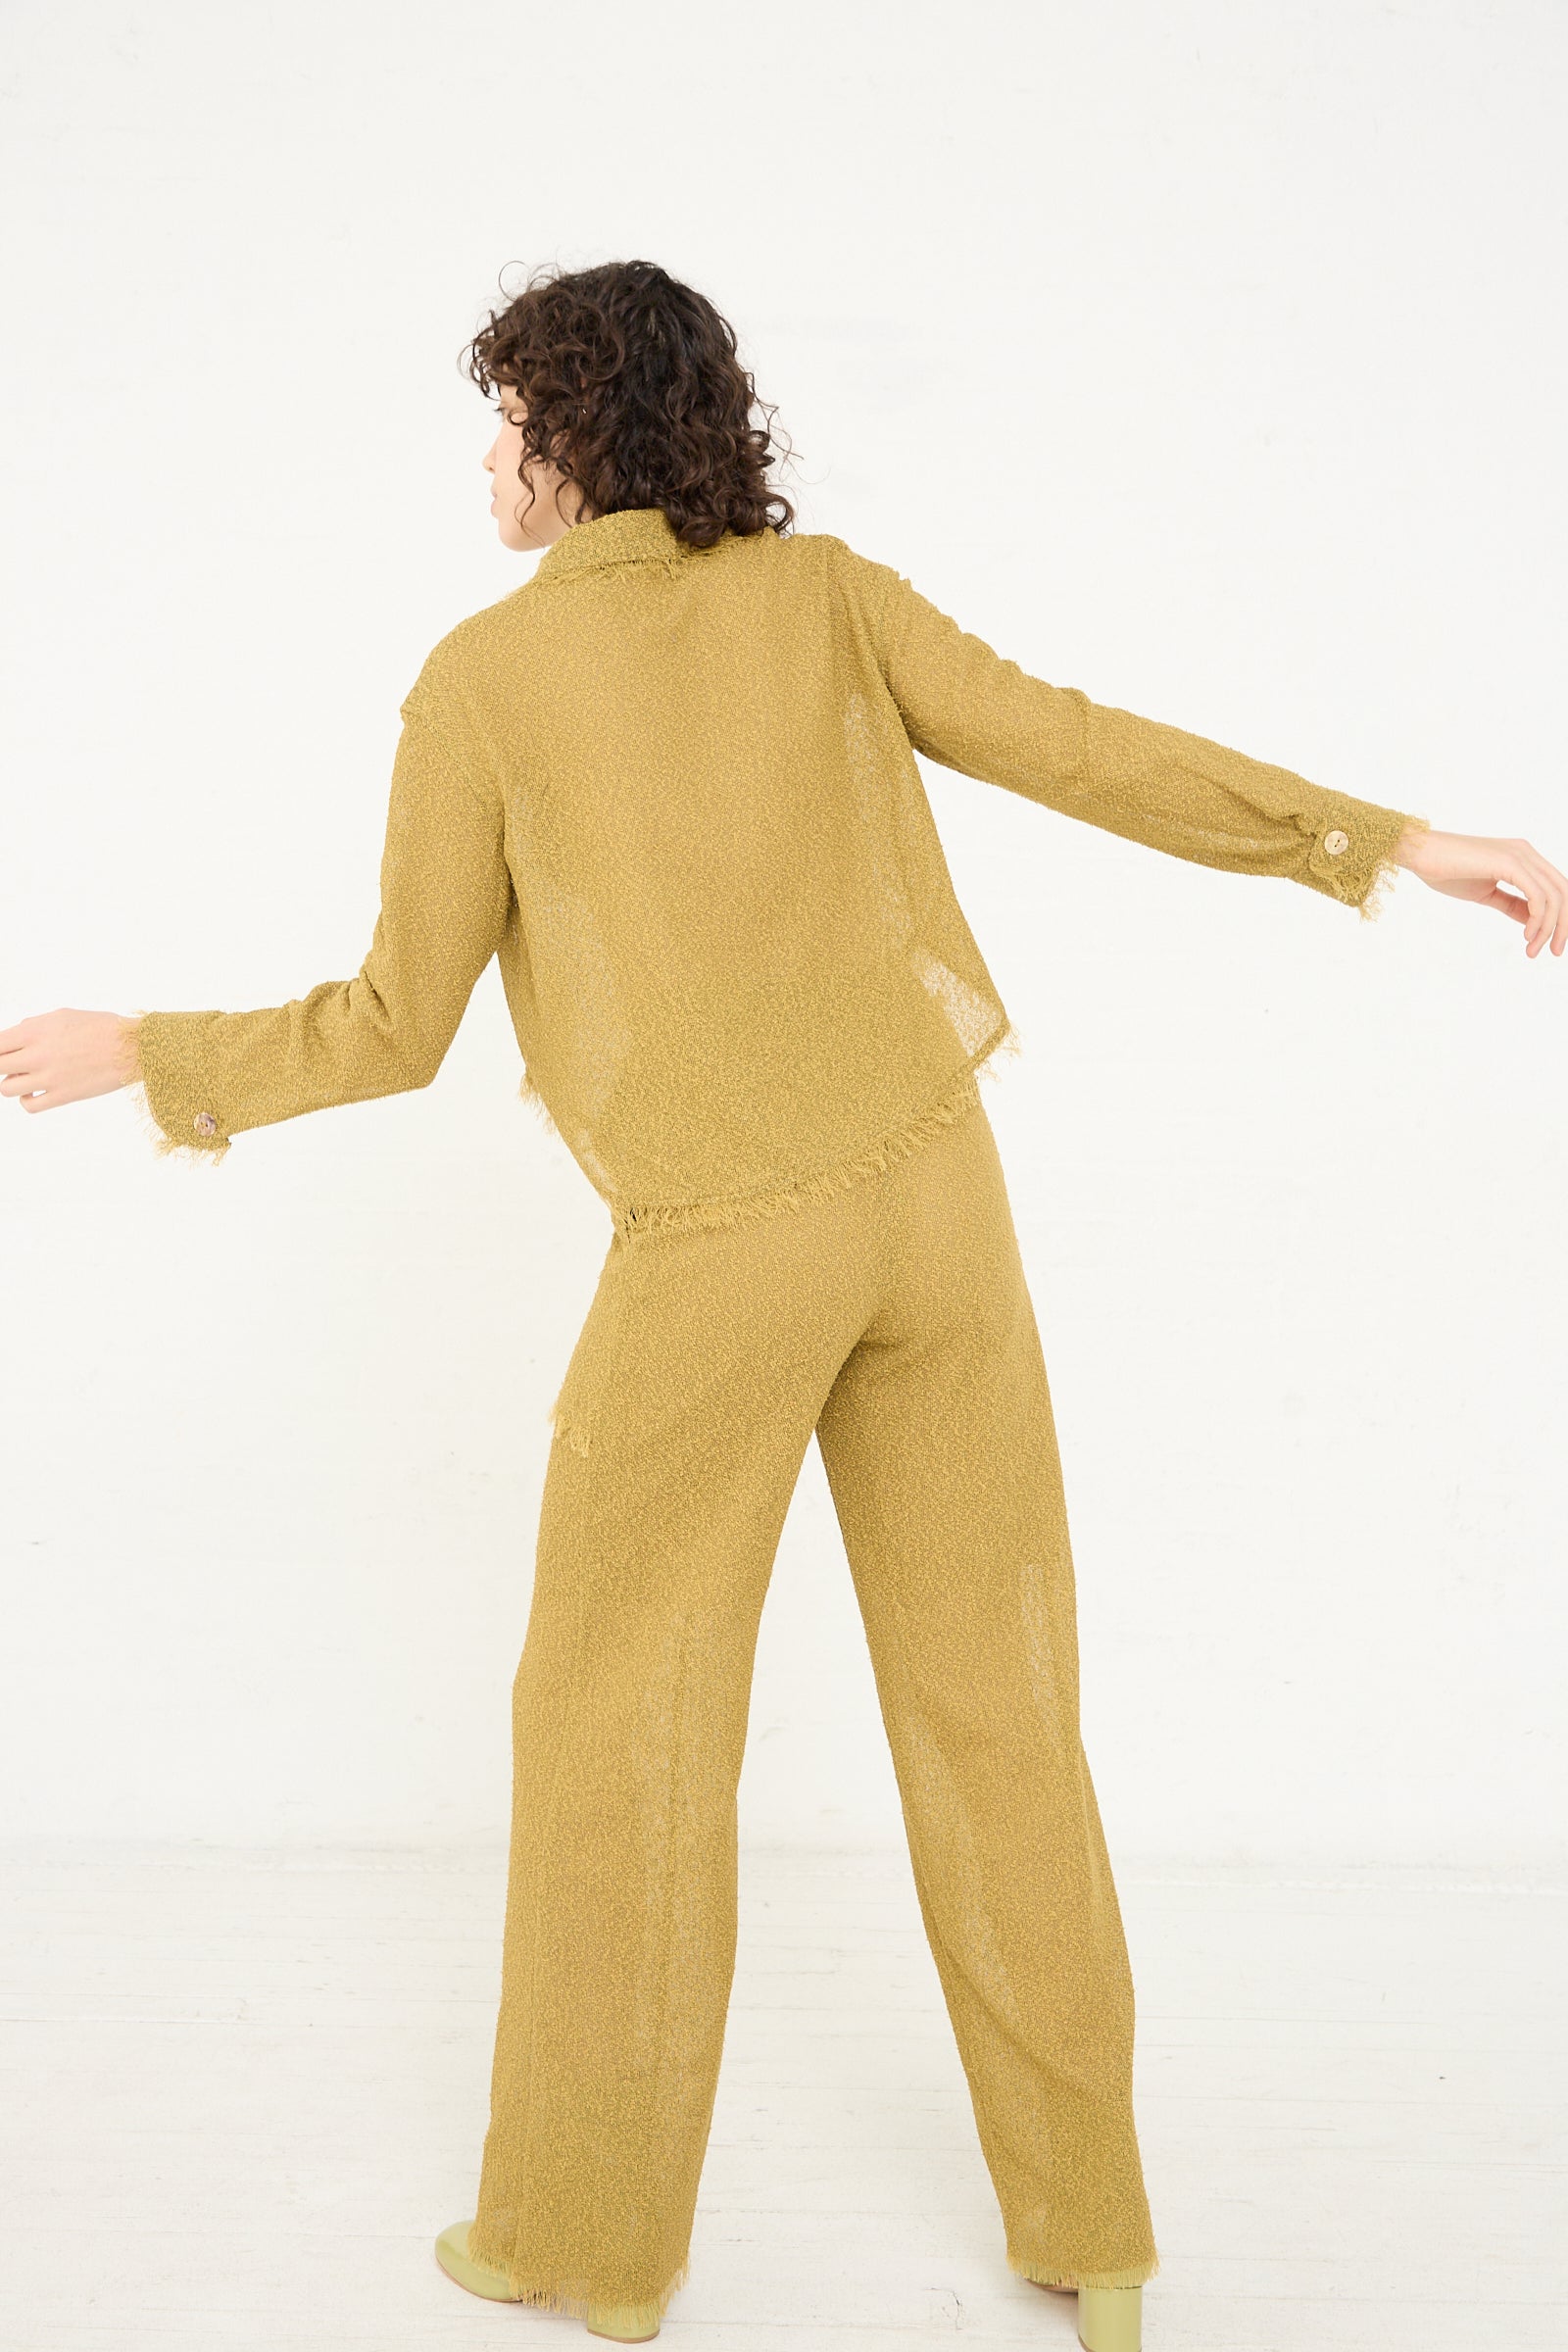 A woman is standing in a lightweight, yellow Tweed Blouse in Cumin by Veronique Leroy pajama set.